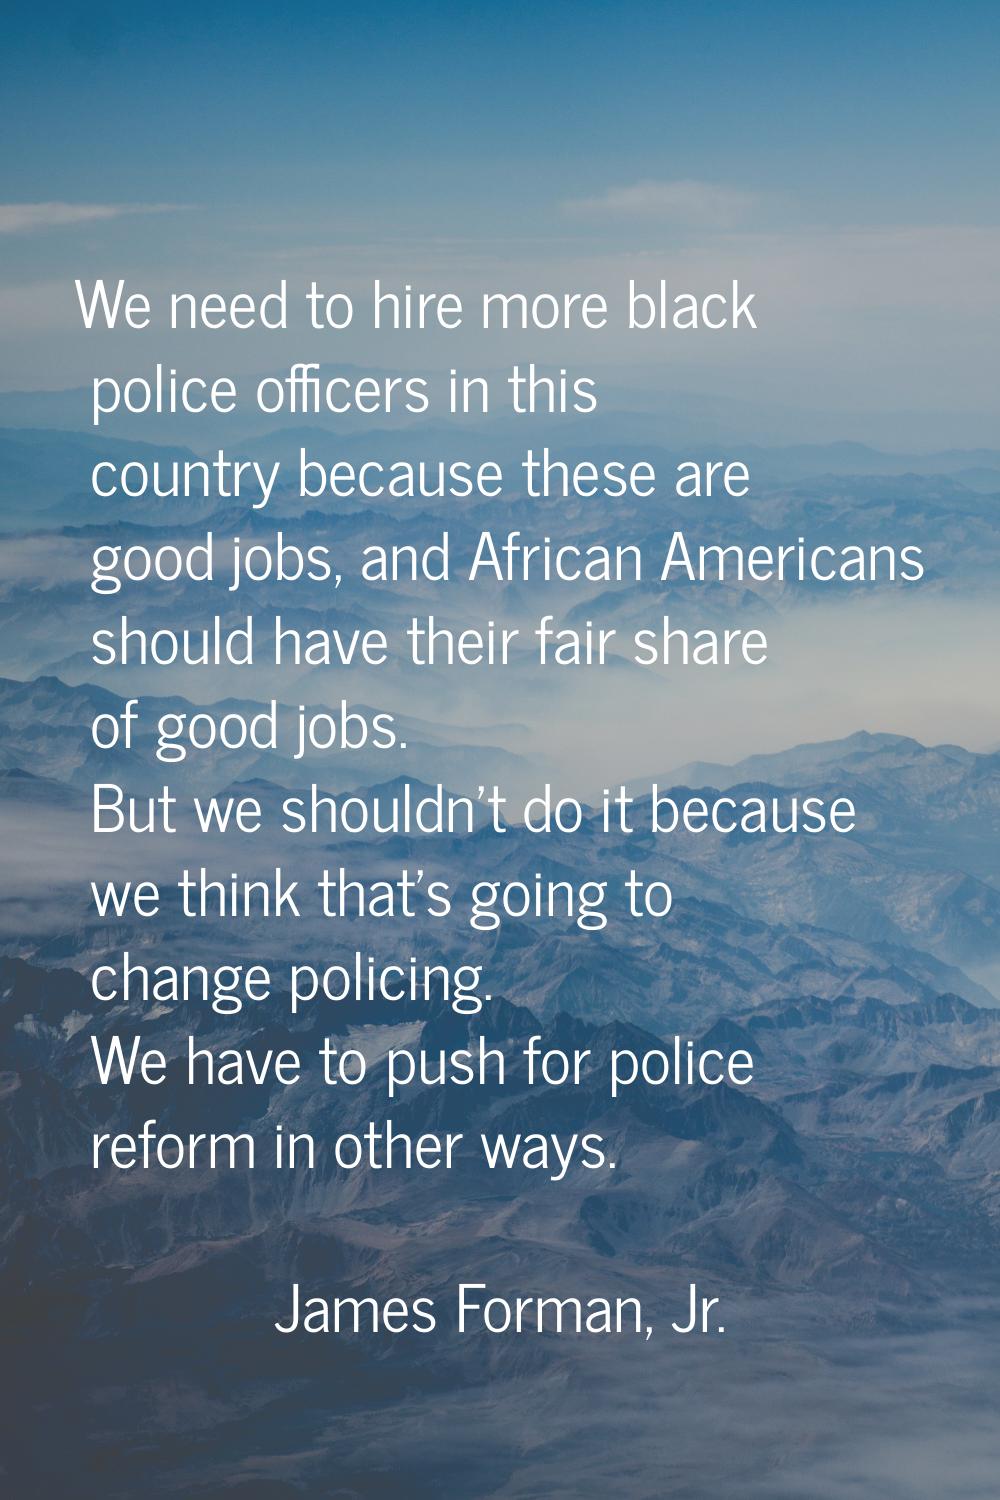 We need to hire more black police officers in this country because these are good jobs, and African